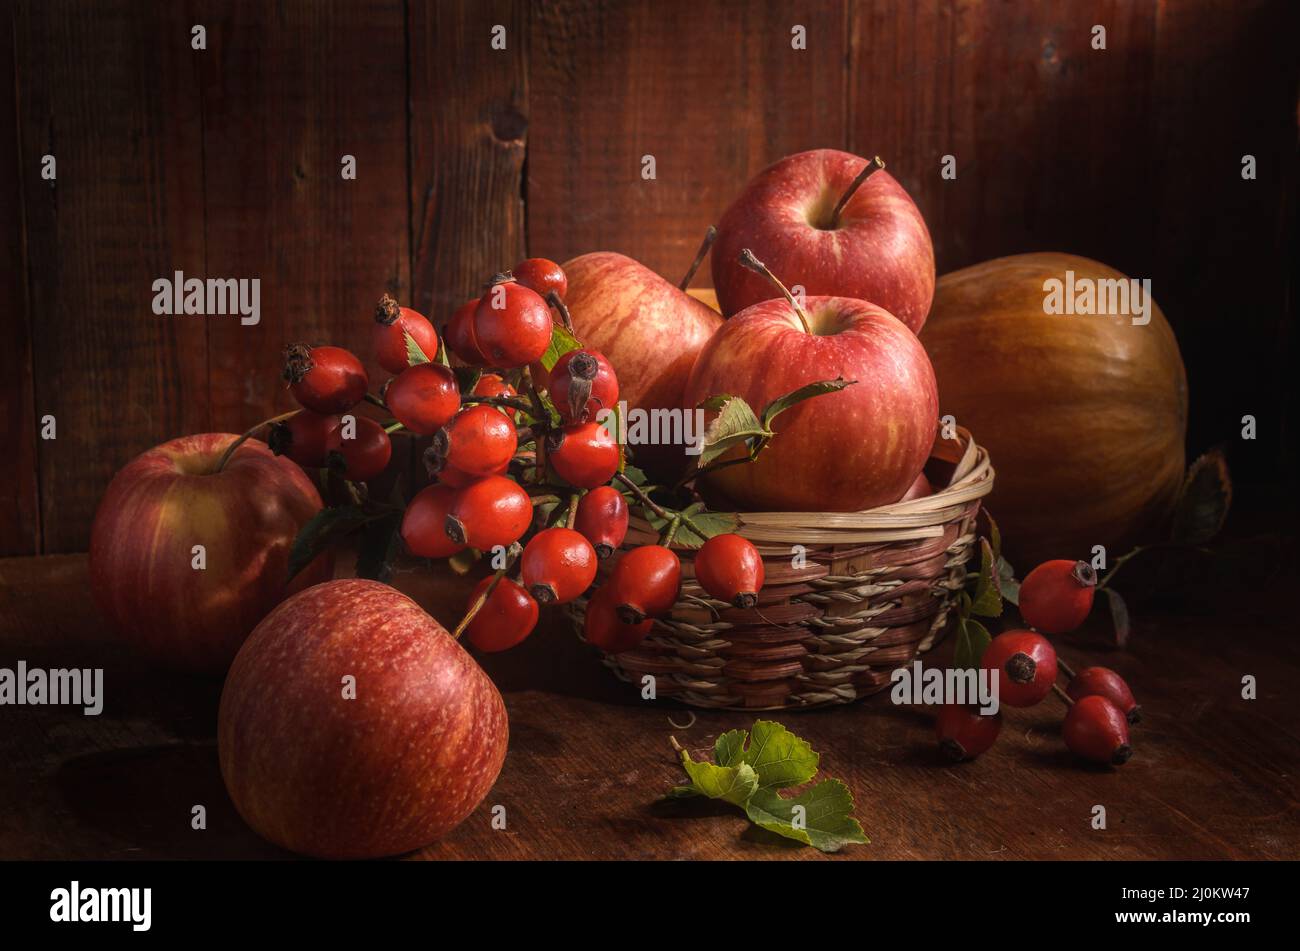 Apples and other fruits on a dark wooden background in a rustic style Stock Photo